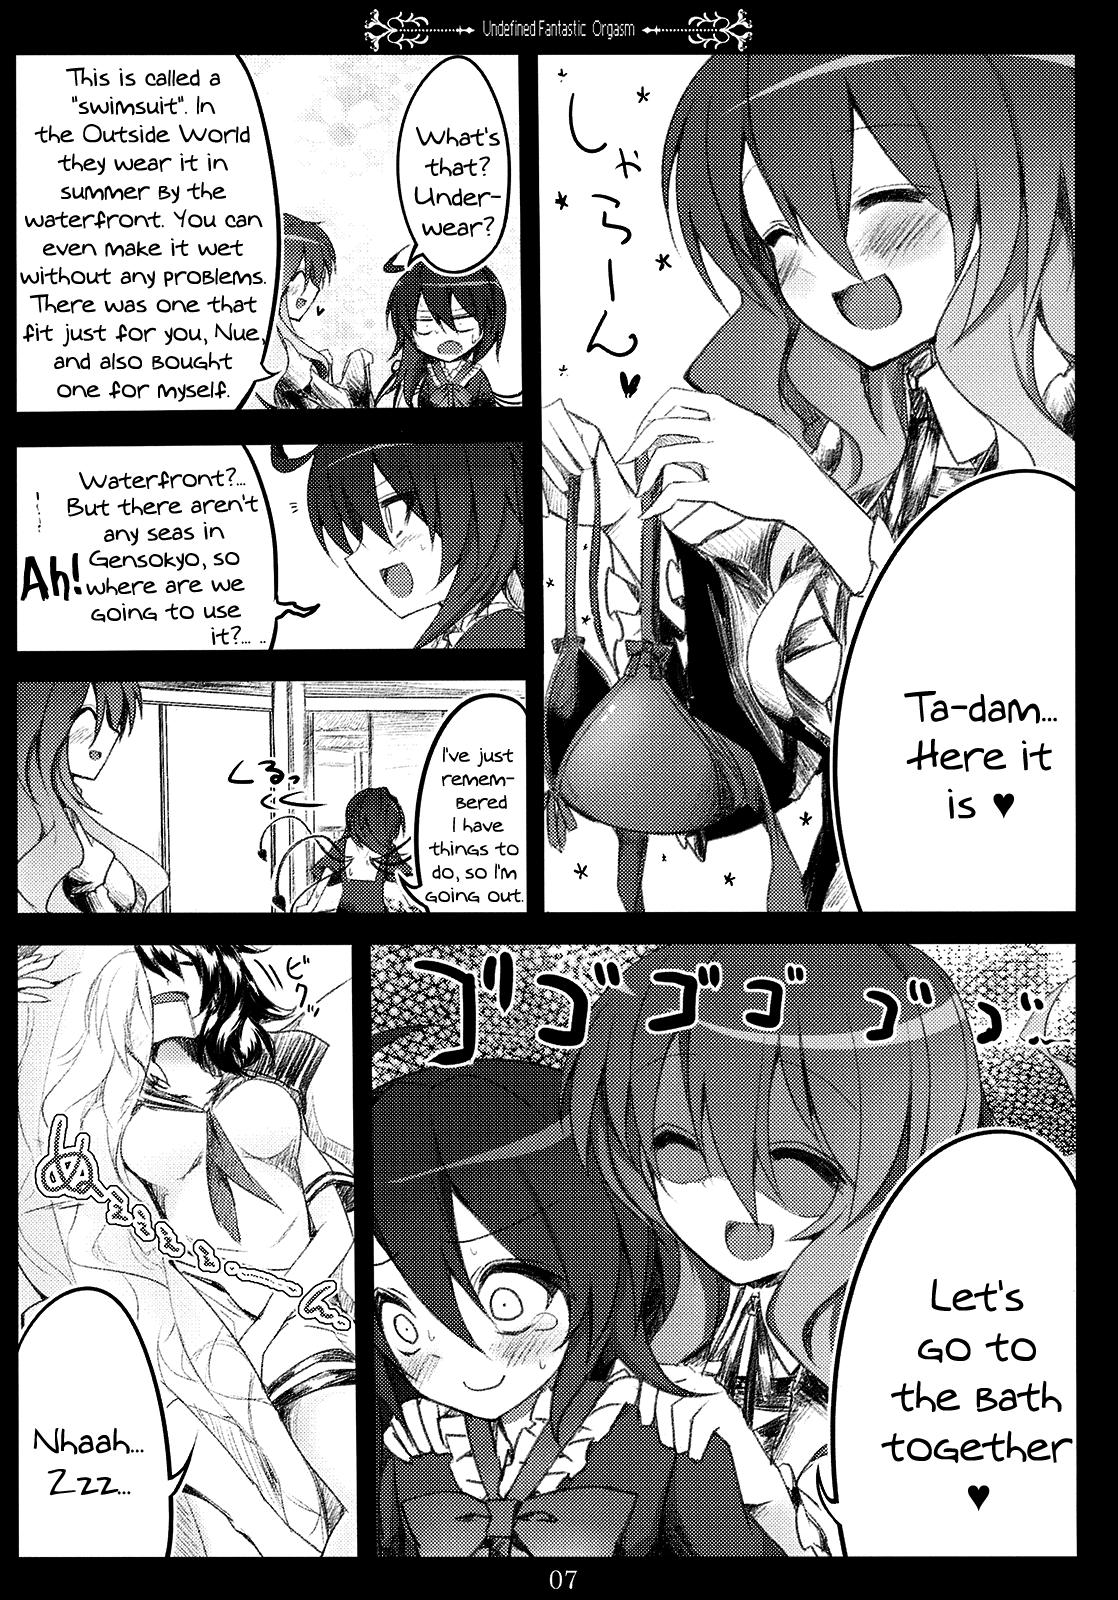 Asian Babes Undefined Fantastic Orgasm - Touhou project Passion - Page 7